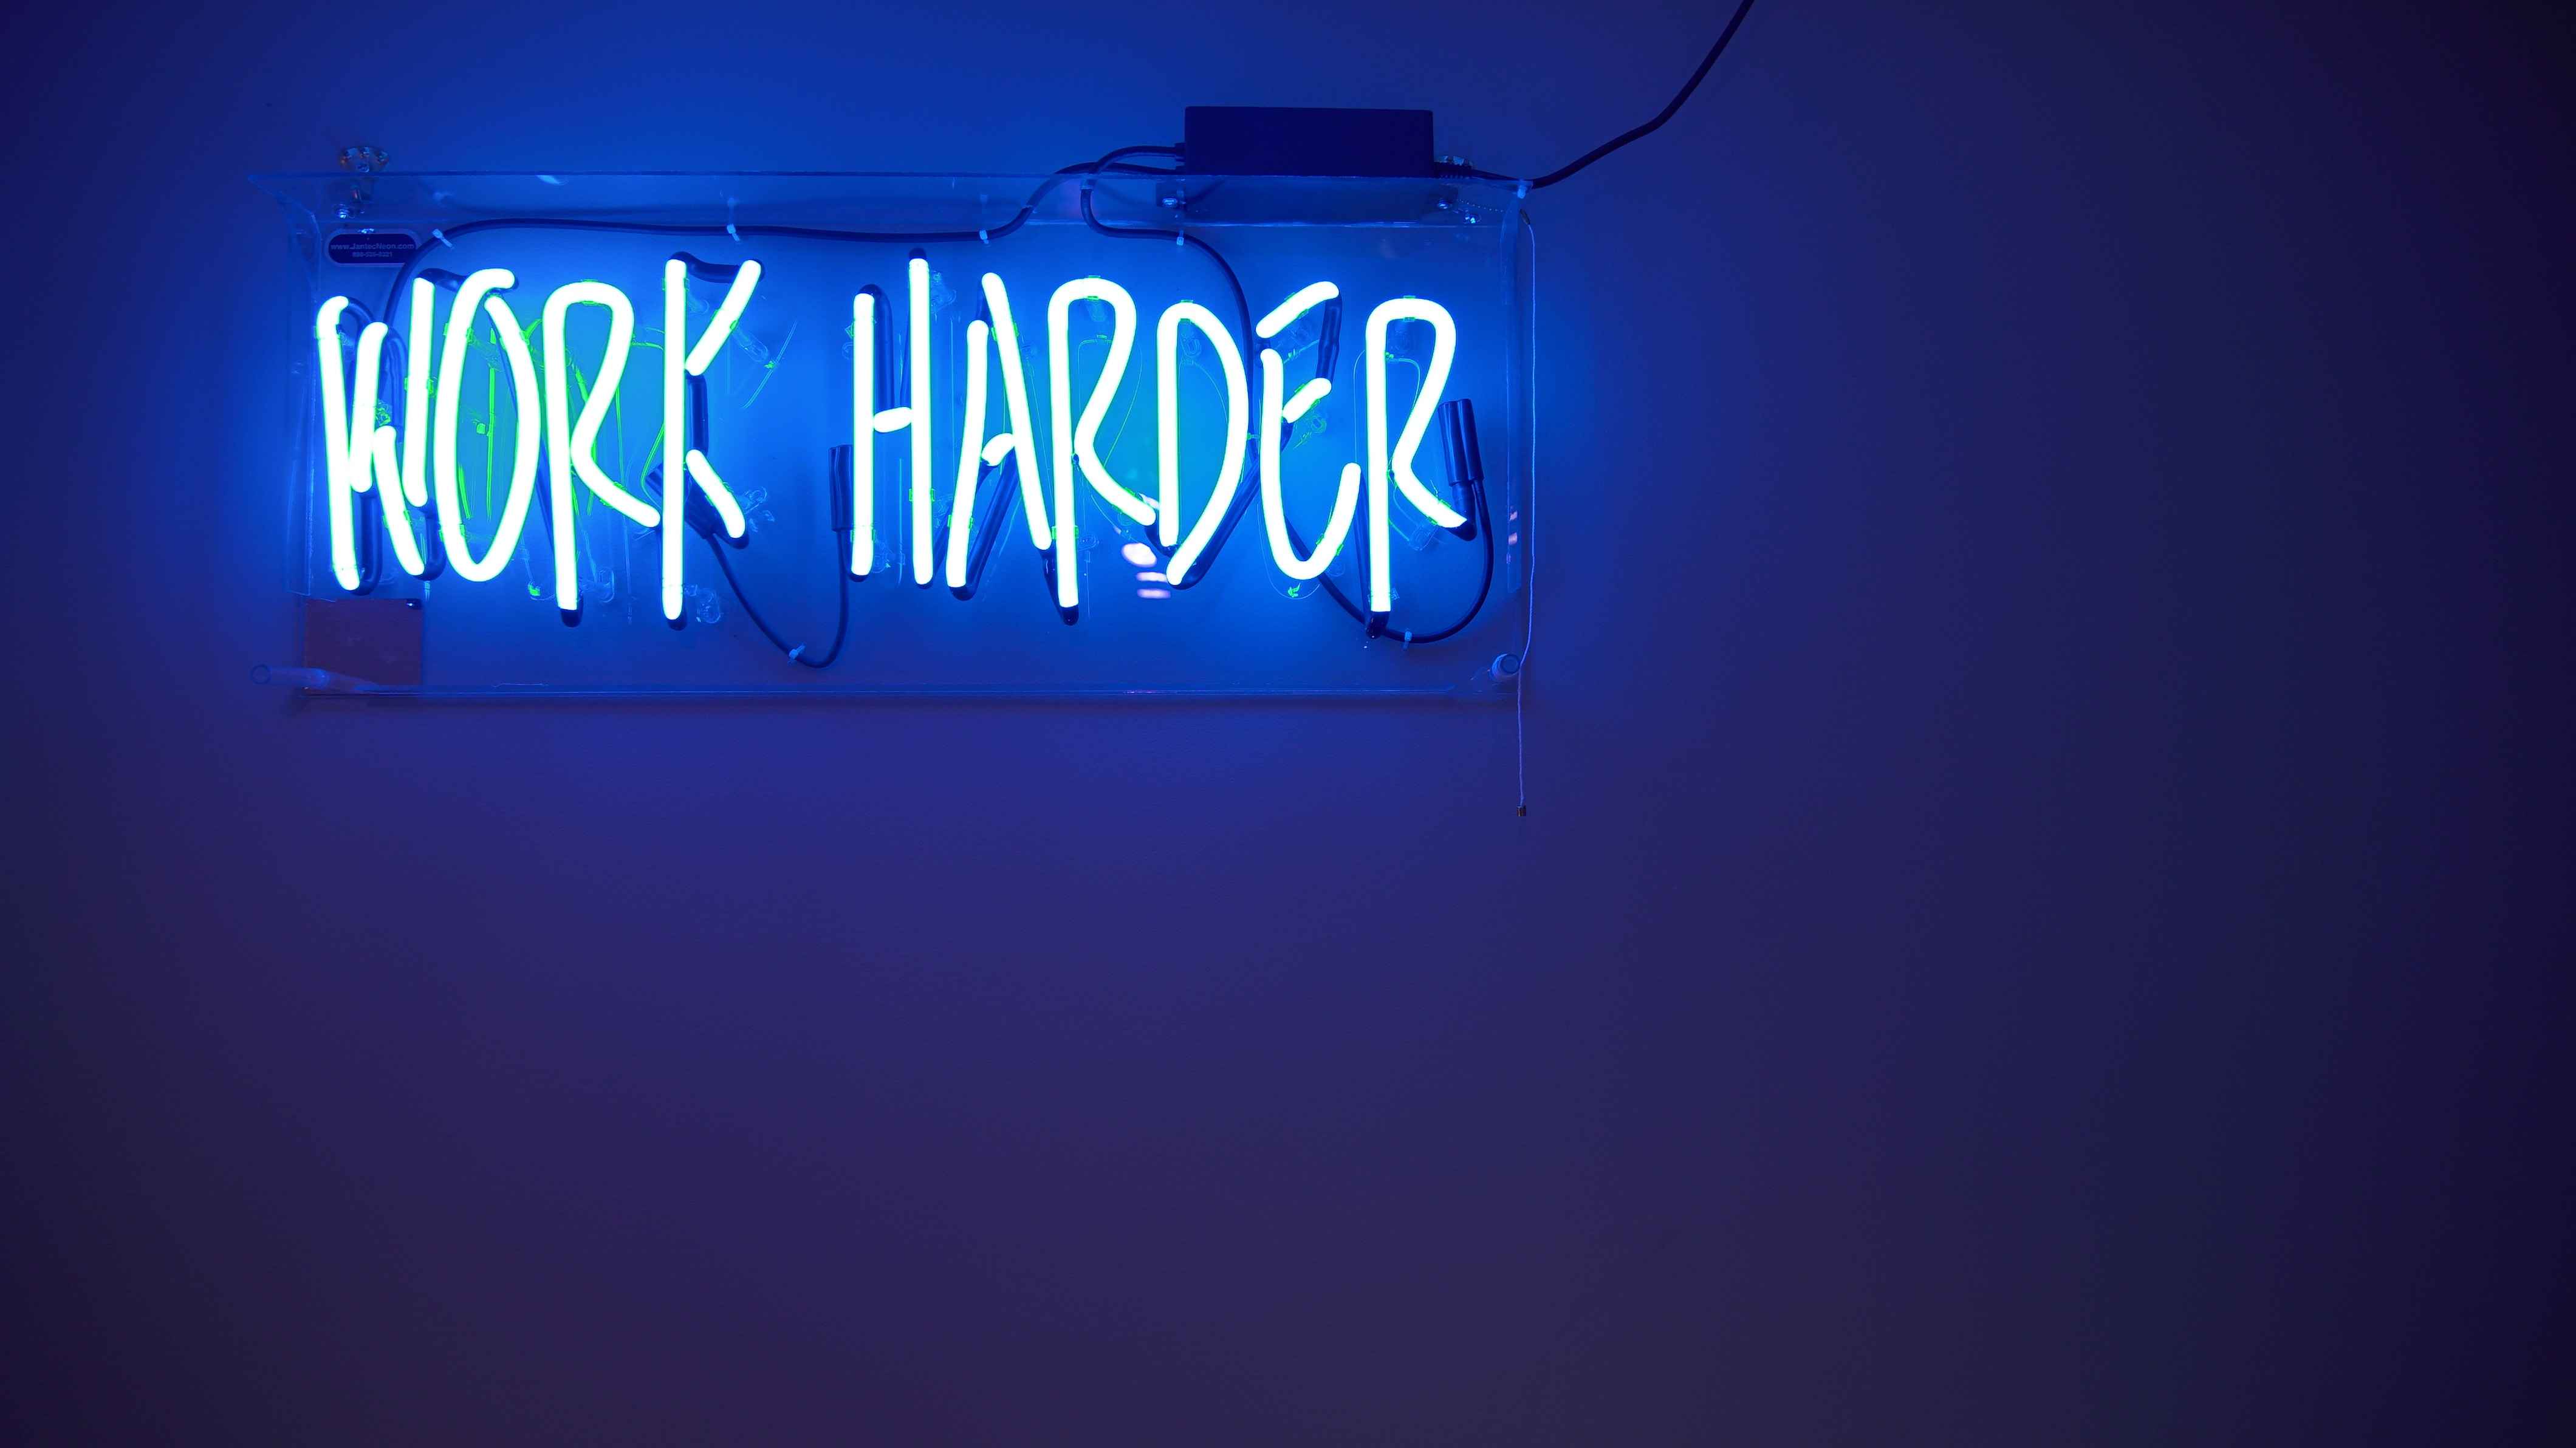 A neon sign saying "Work harder"